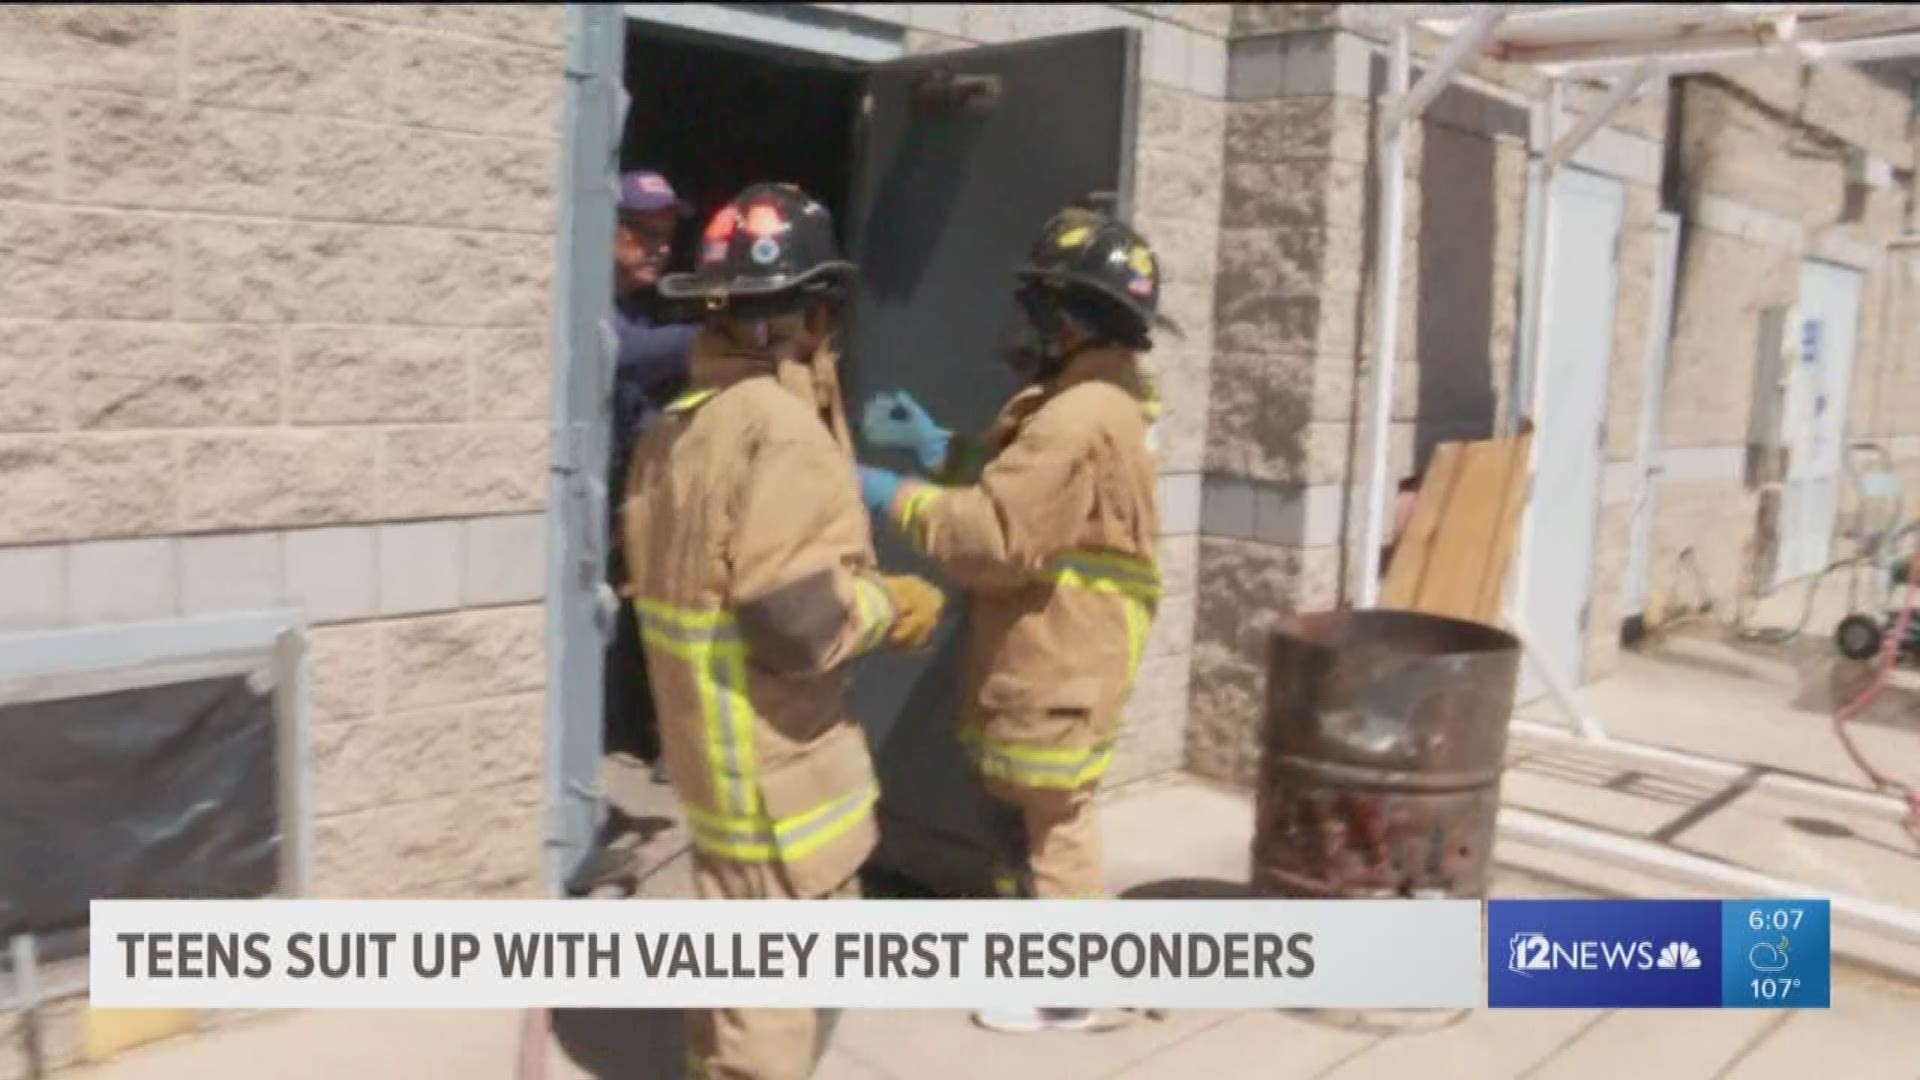 A group of about 40 teens suited up with Valley first responders for a special safety academy.